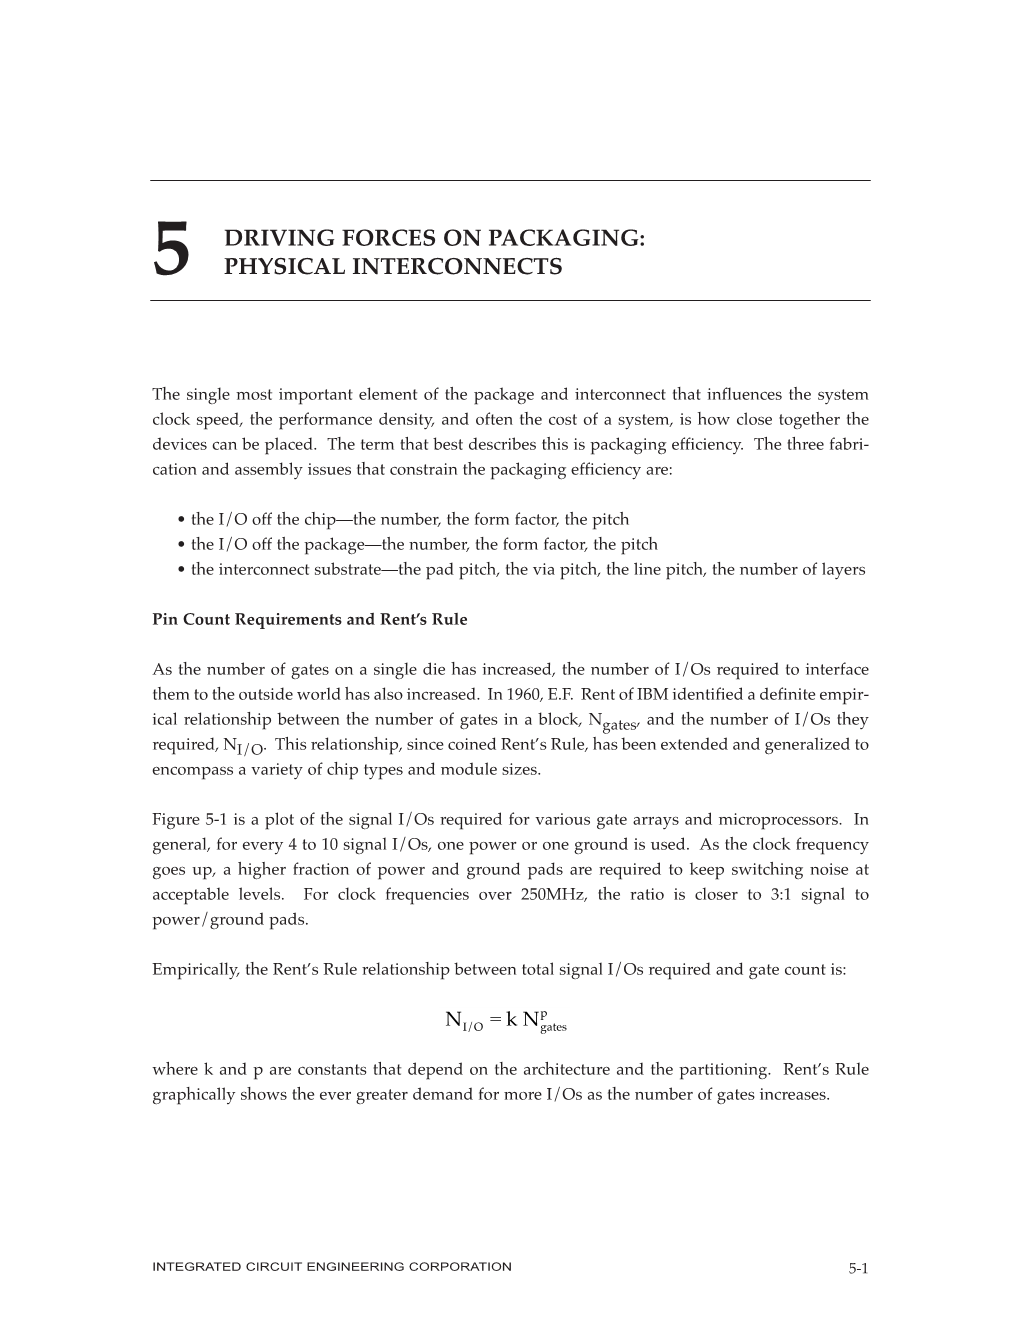 Chapter 5. Driving Forces on Packaging: Physical Interconnects